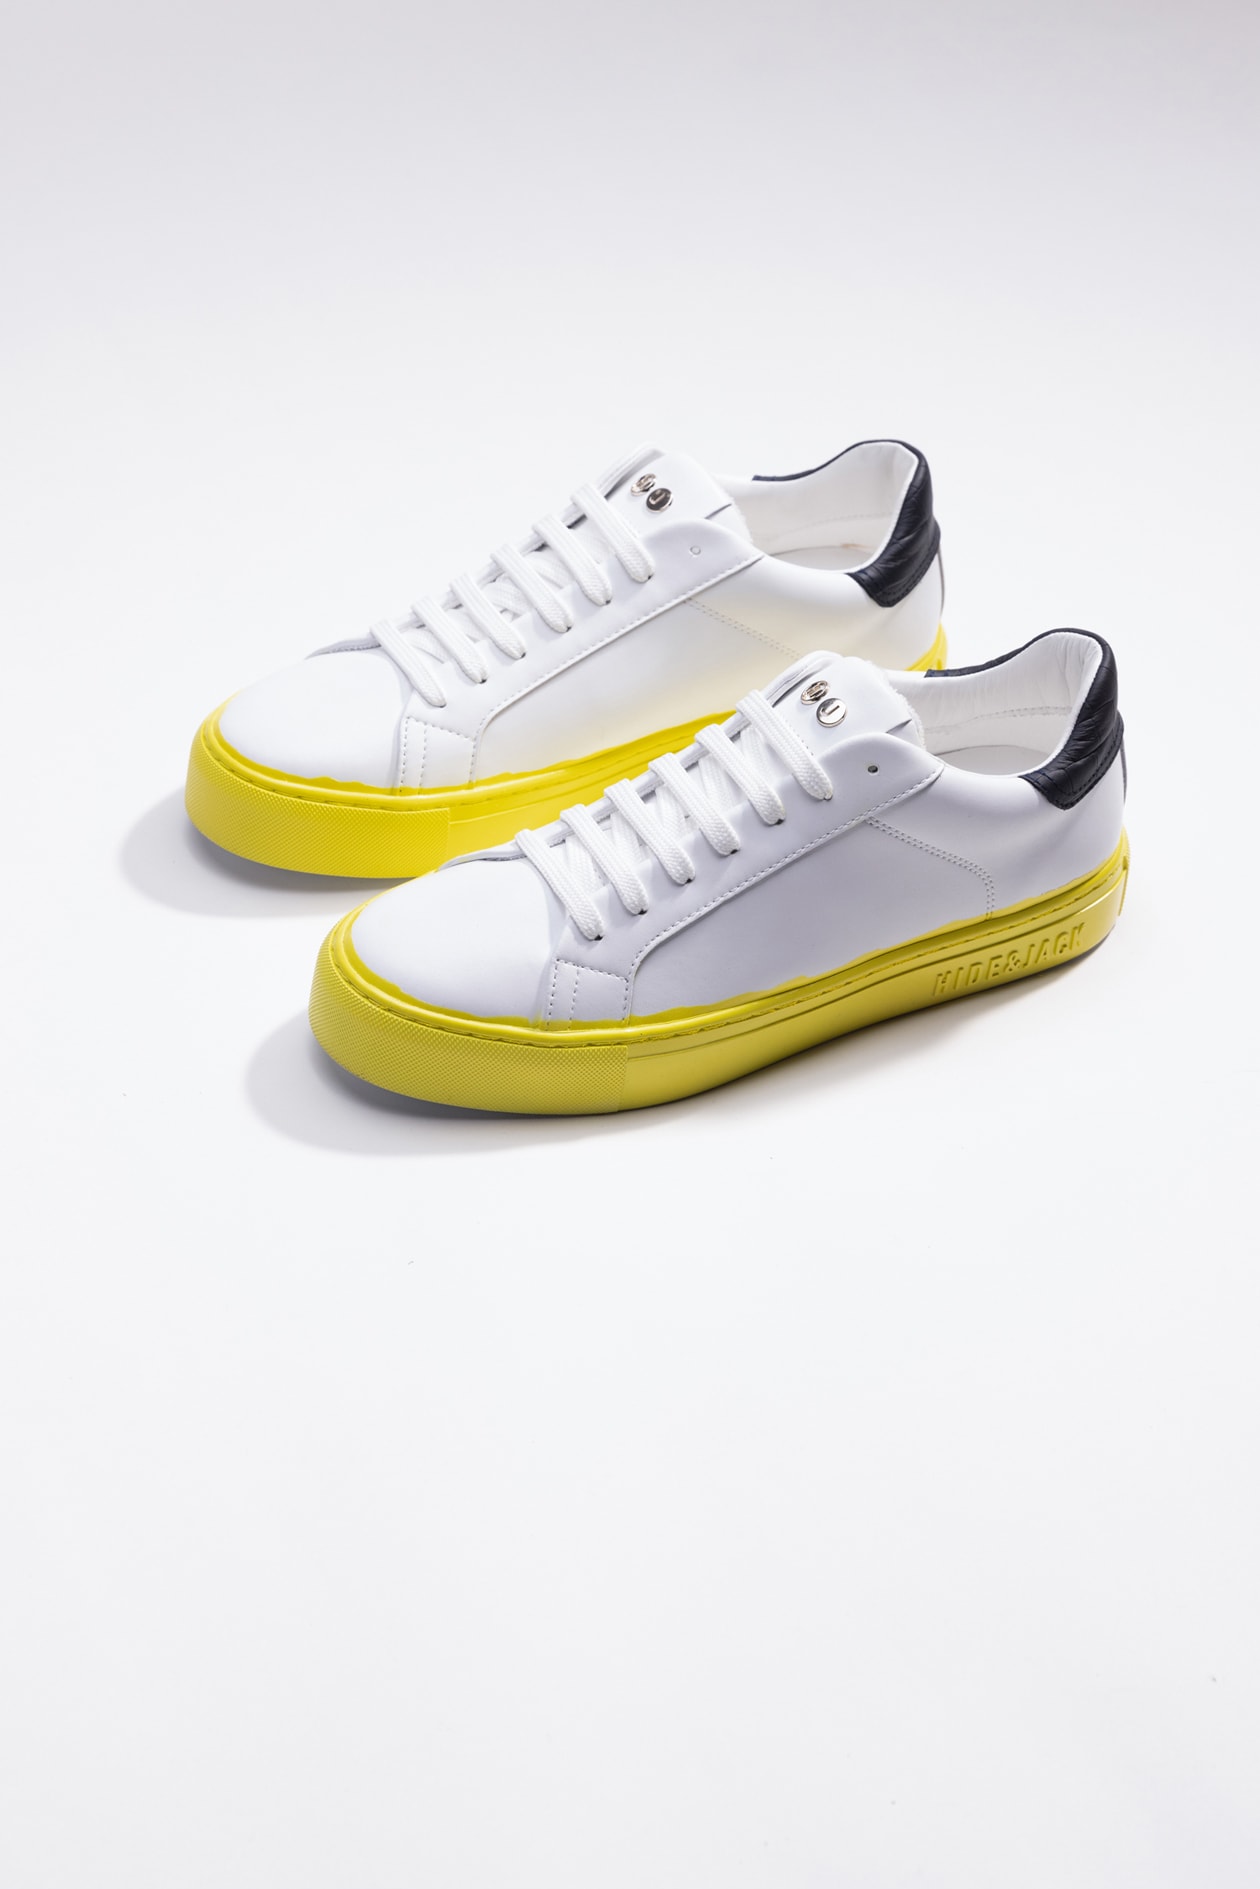 Hide&amp;jack Low Top Trainer - Sky Candy Black Yellow